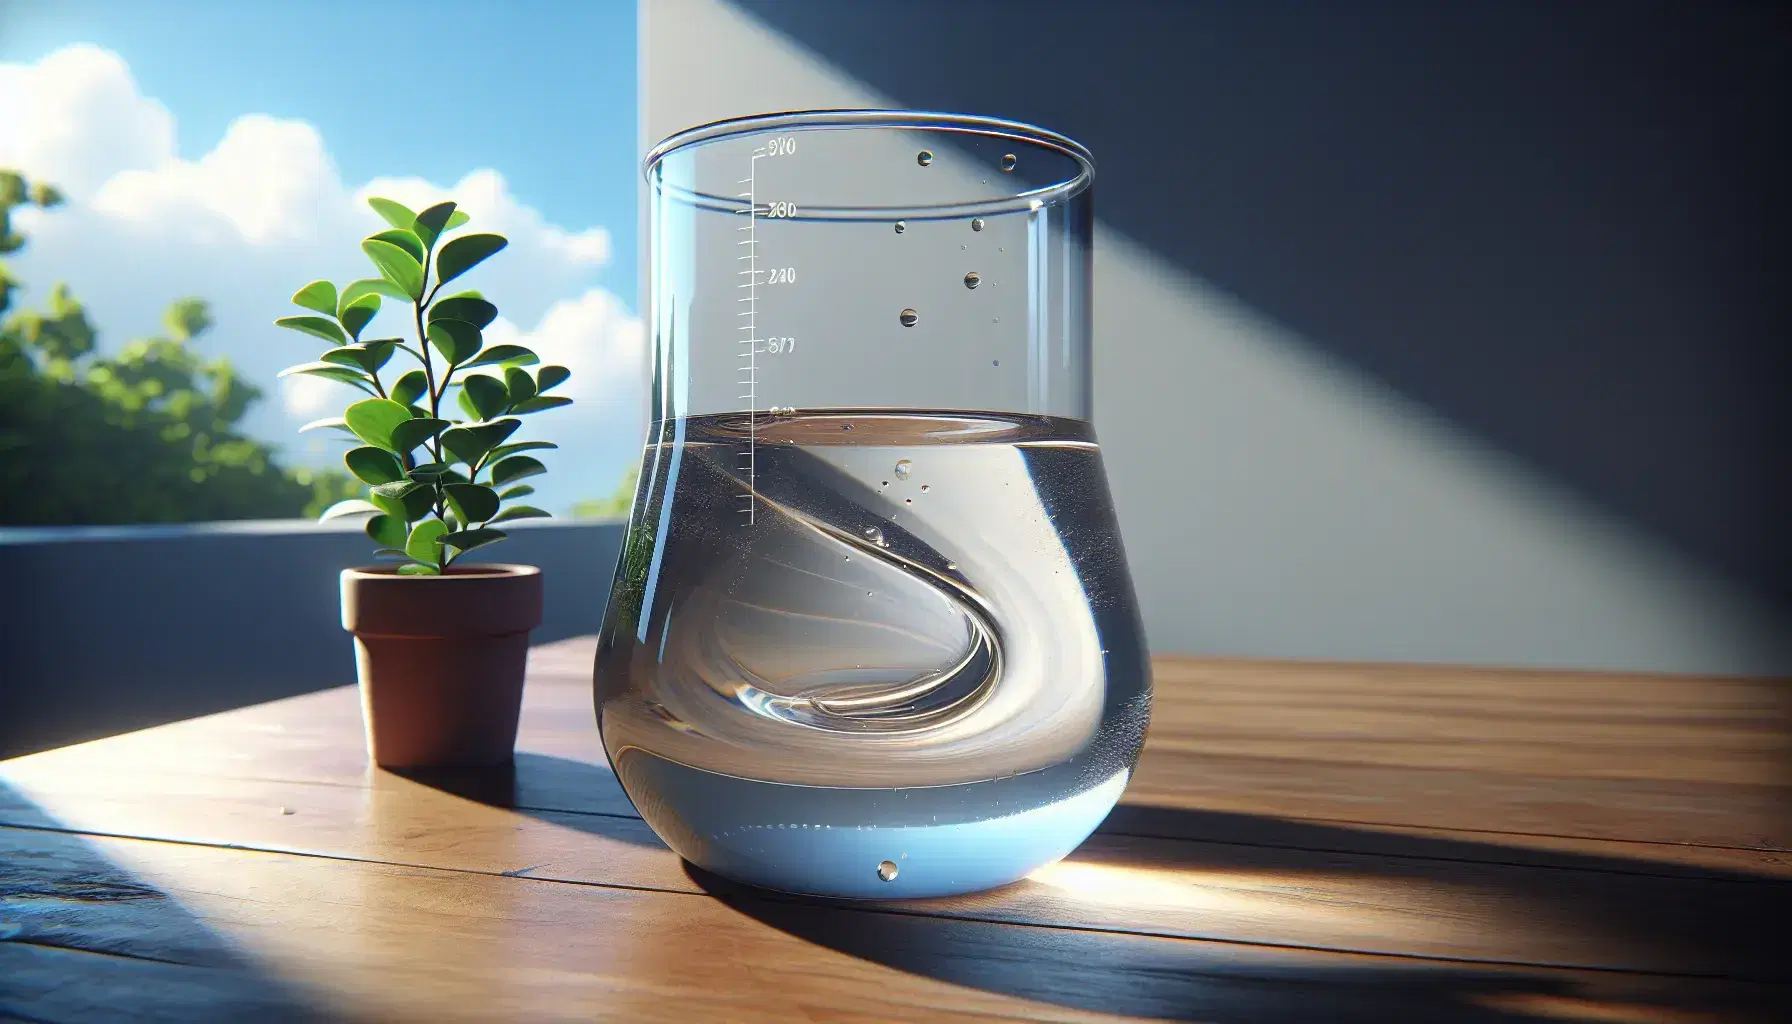 Glass beaker with water on wooden table, green plant in terracotta pot and spherical flask with ice, blue sky and lake background.